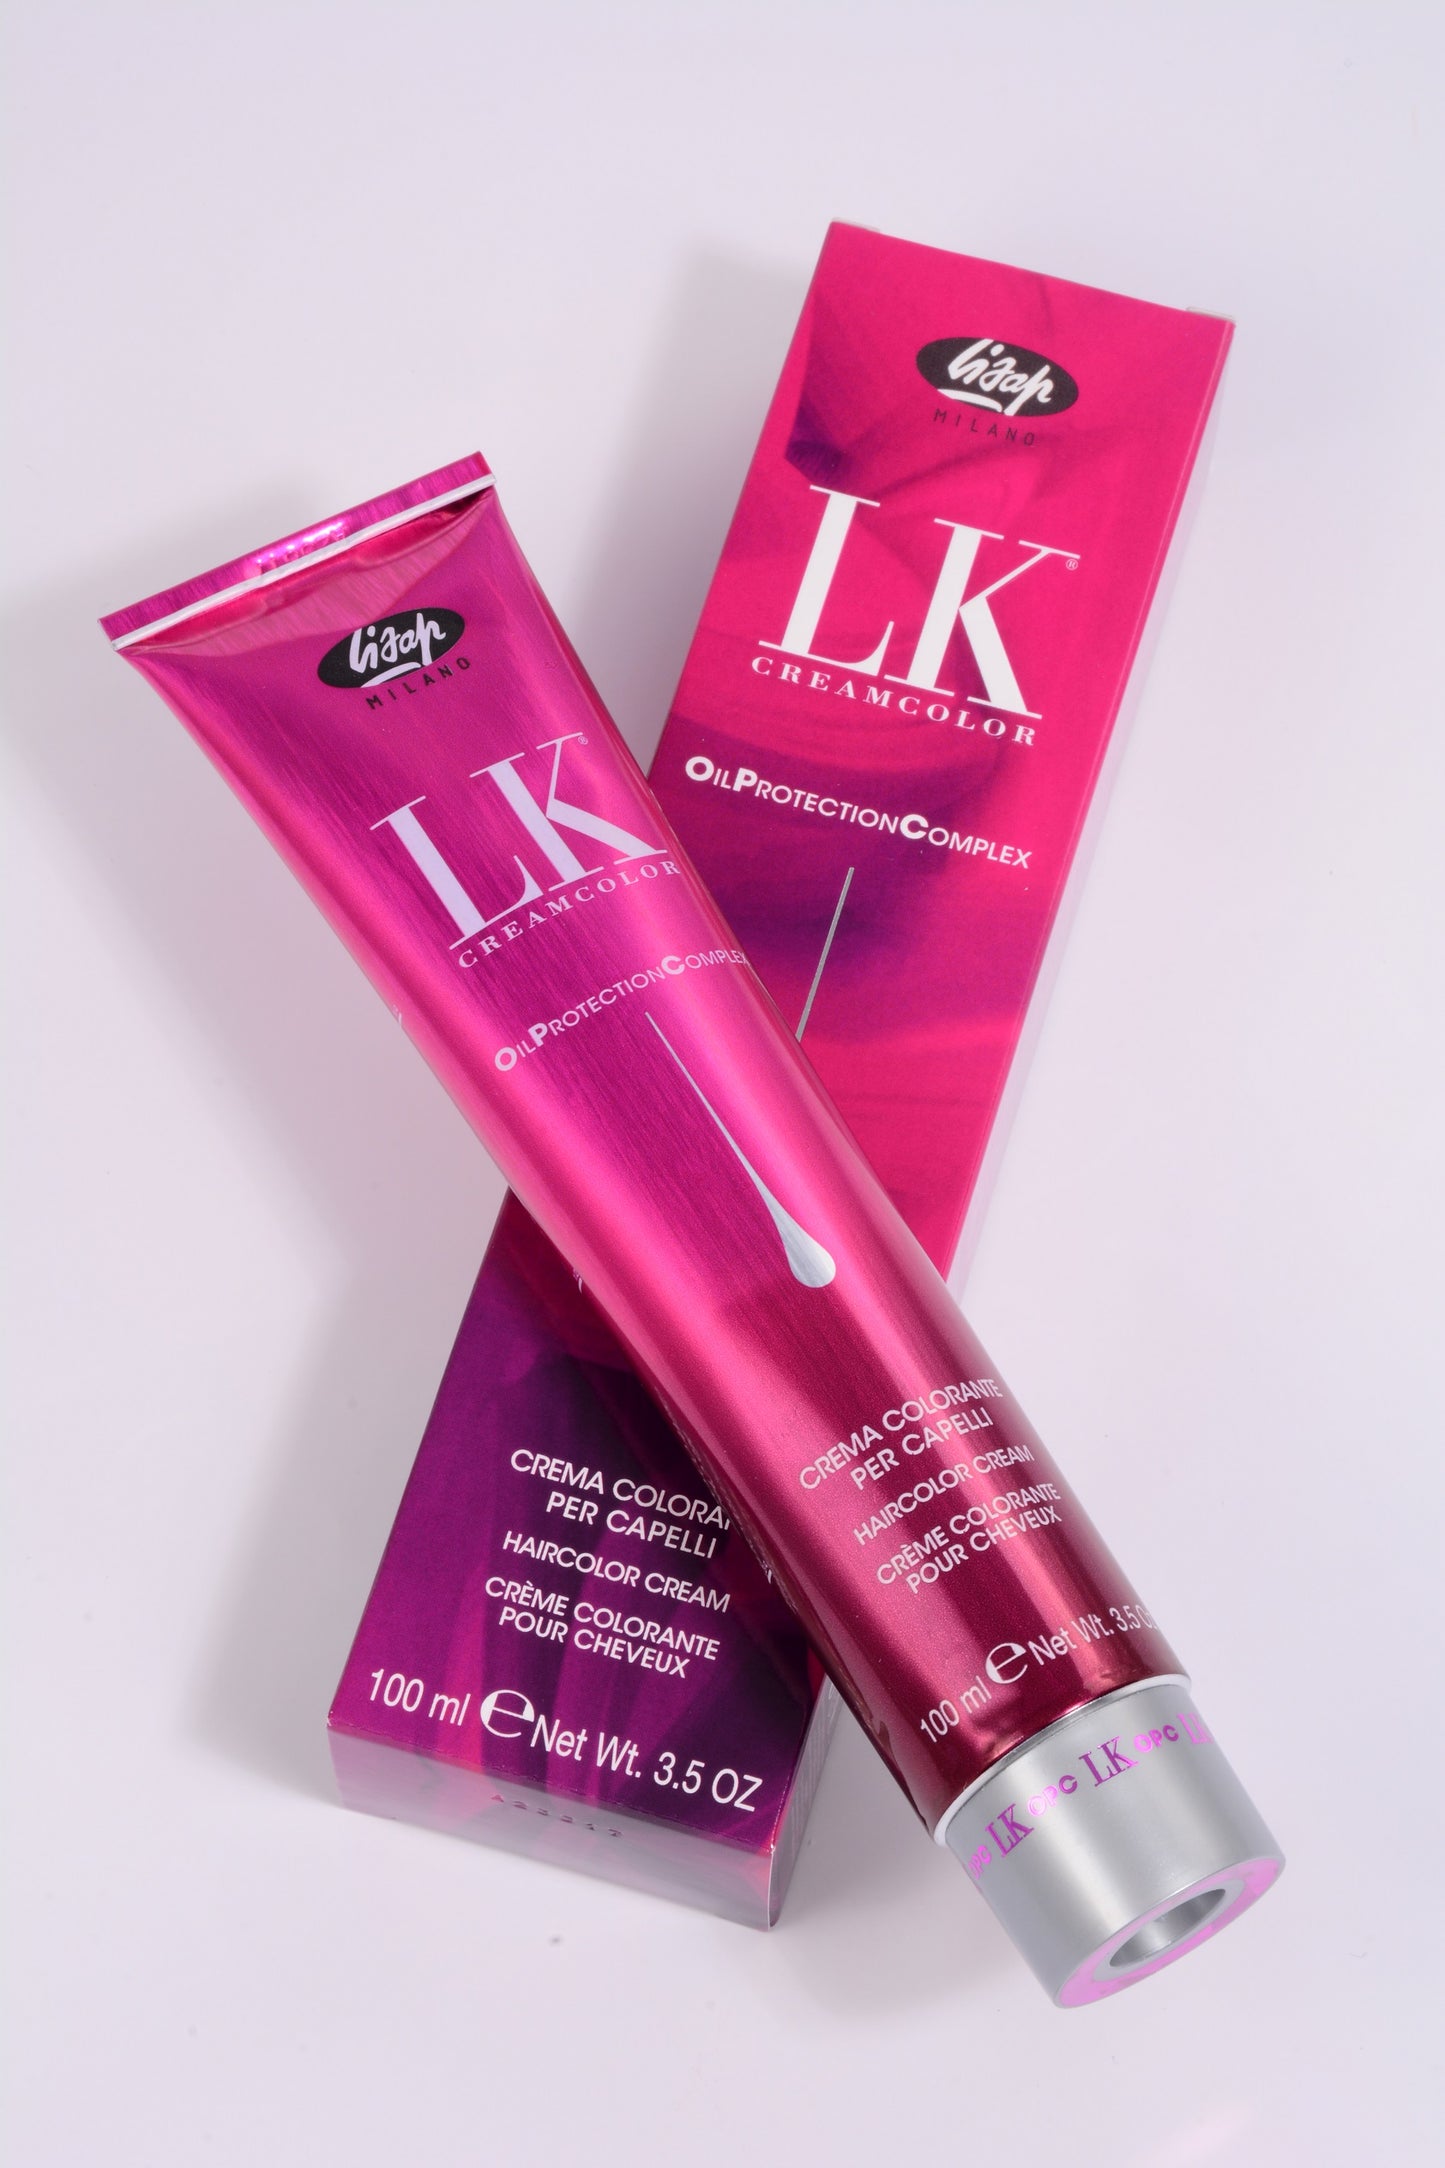 LK Creamcolor 9/3 Oil Protection Complex